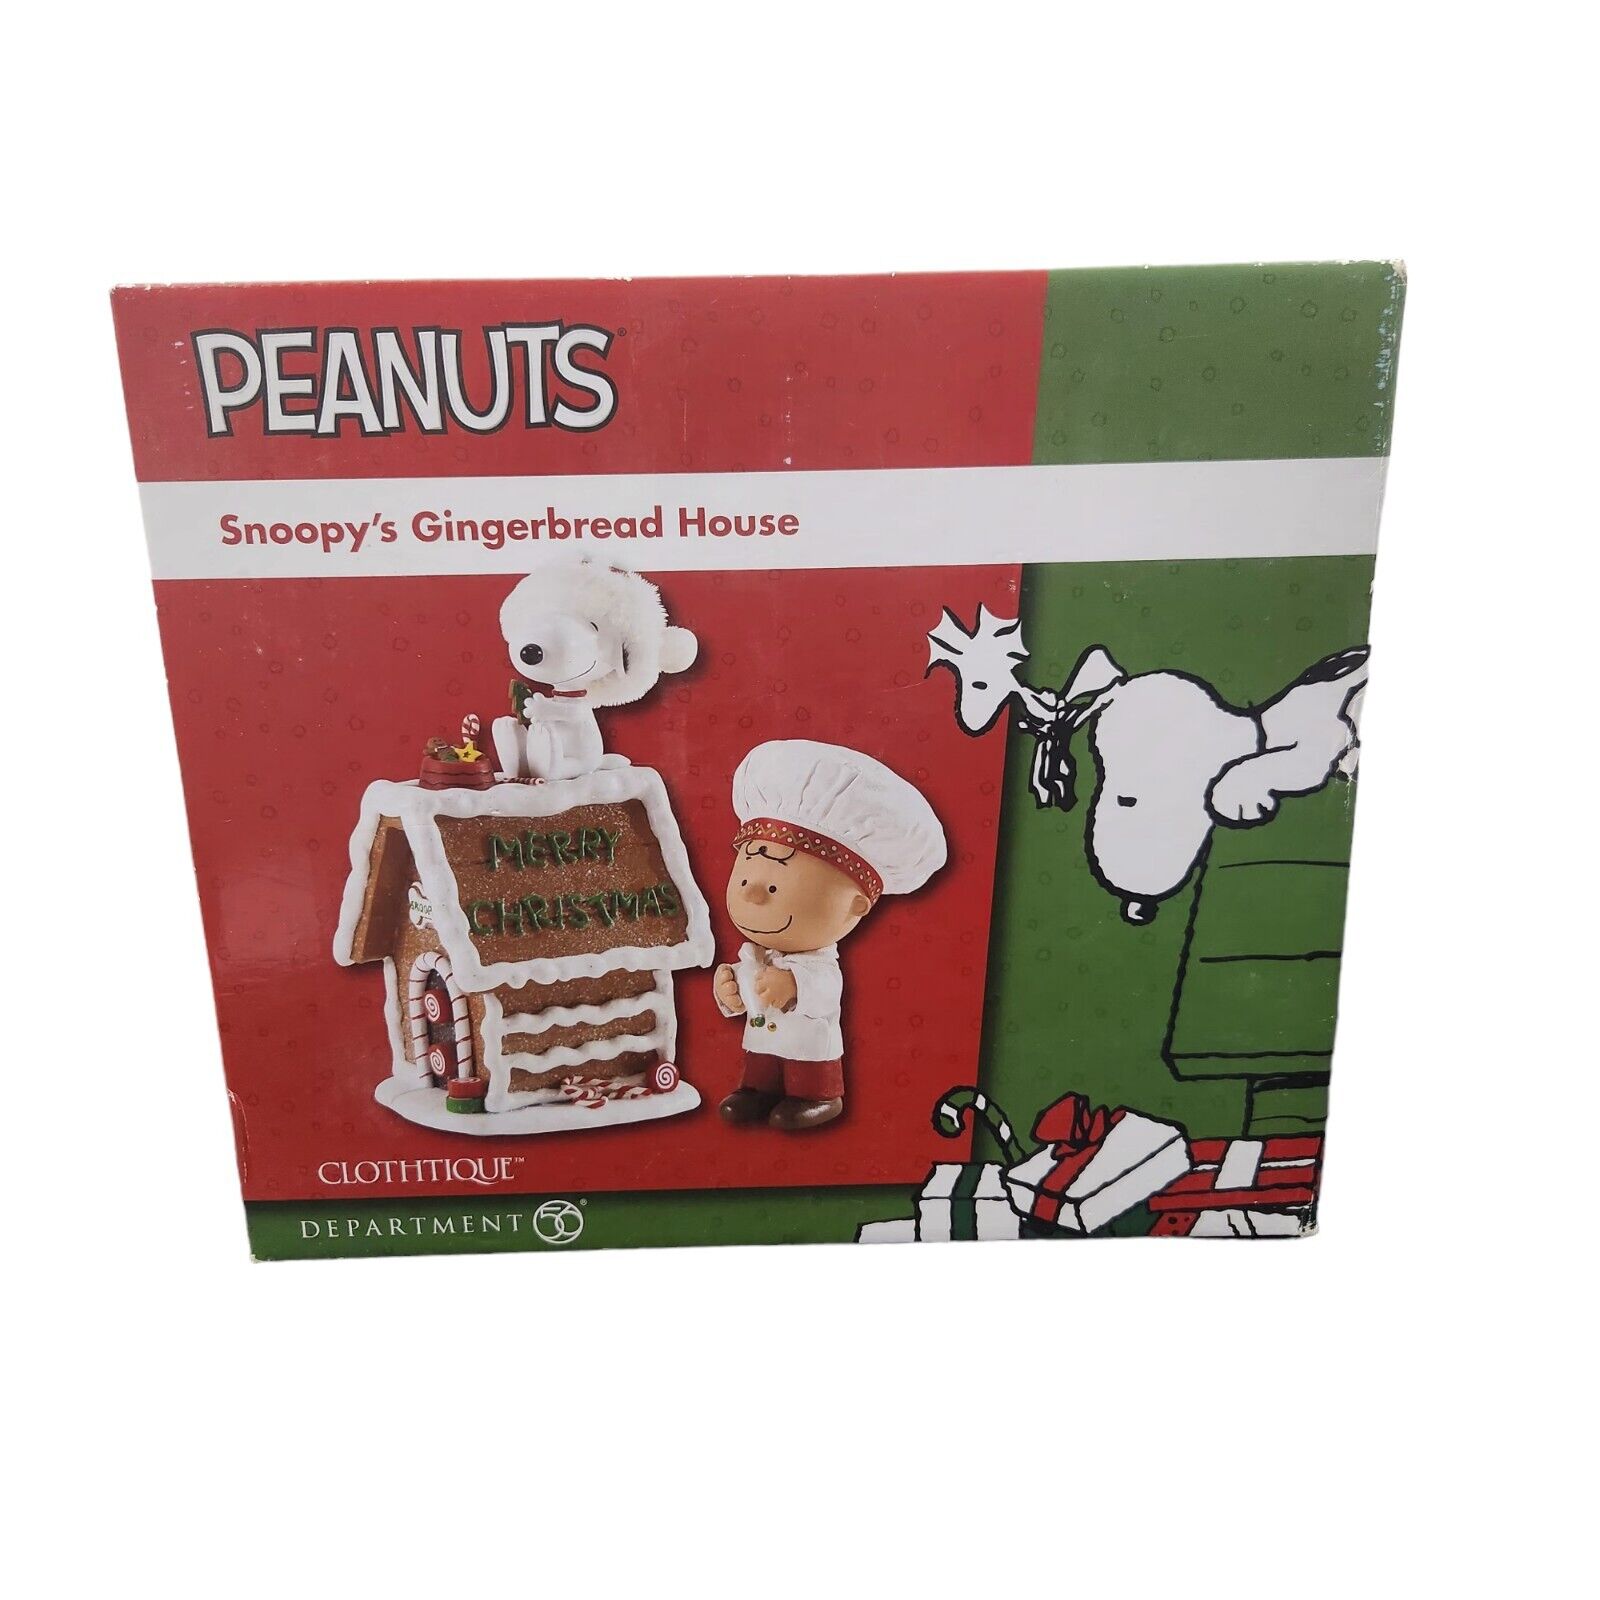 RARE PEANUTS DEPARTMENT 56 CLOTHTIQUE  SNOOPY'S GINGERBREAD HOUSE CHARLIE BROWN